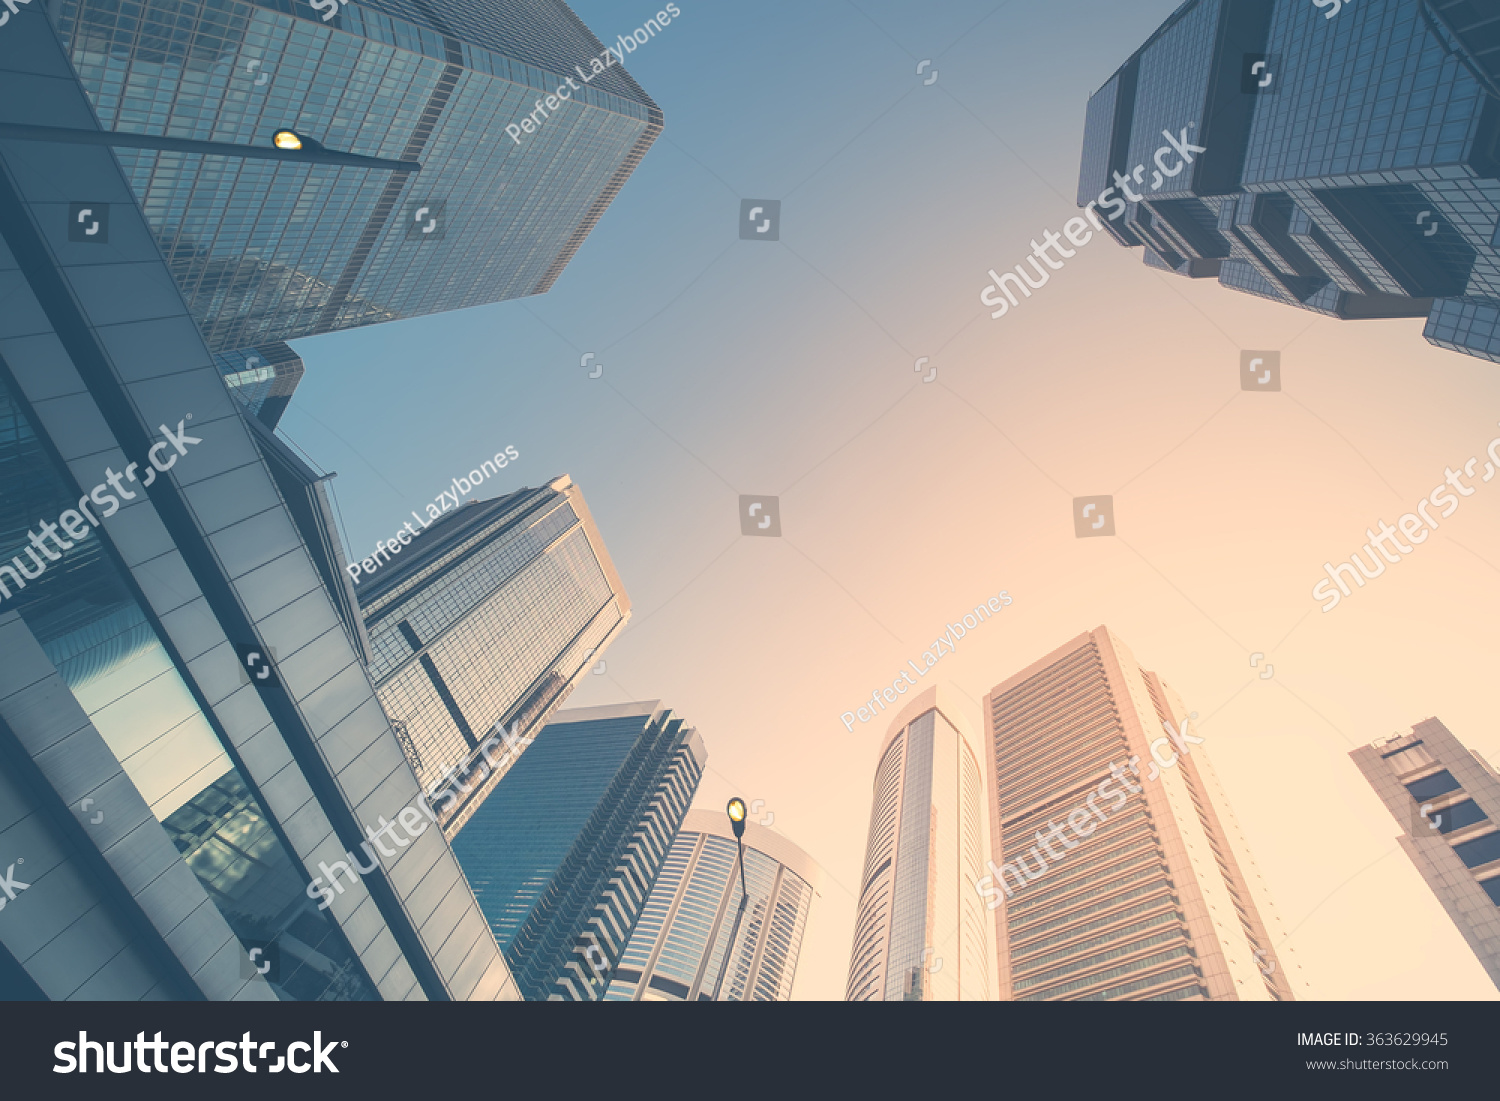 Abstract futuristic cityscape view with modern skyscrapers. Hong Kong #363629945